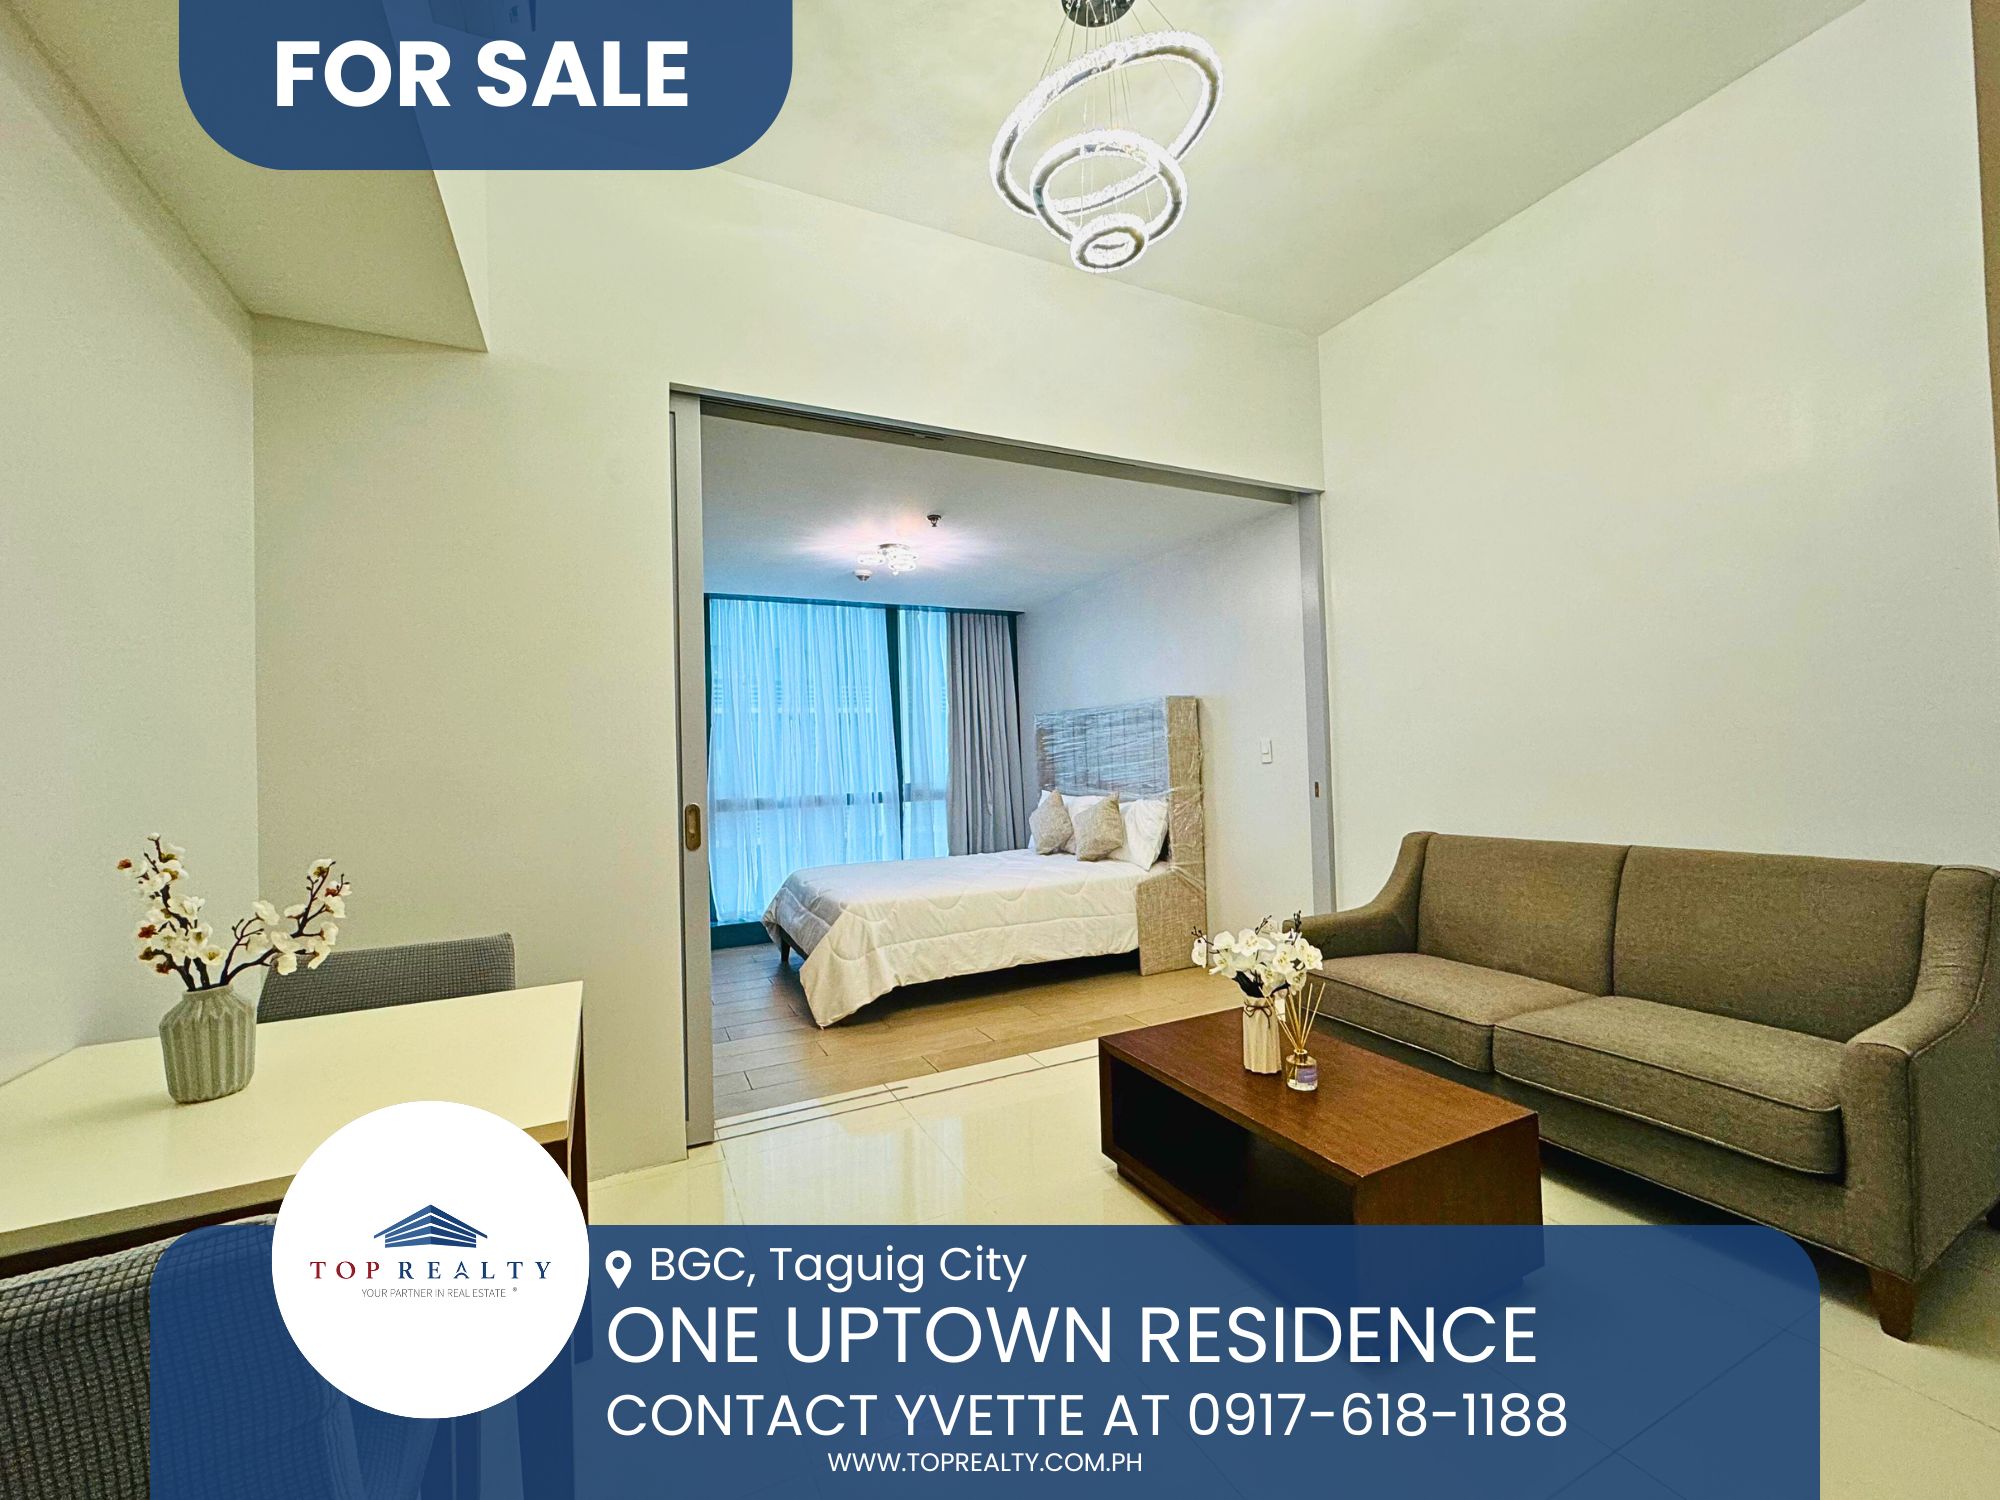 Condo for Sale in BGC, Taguig, One Uptown Residence Fully furnished 1BR